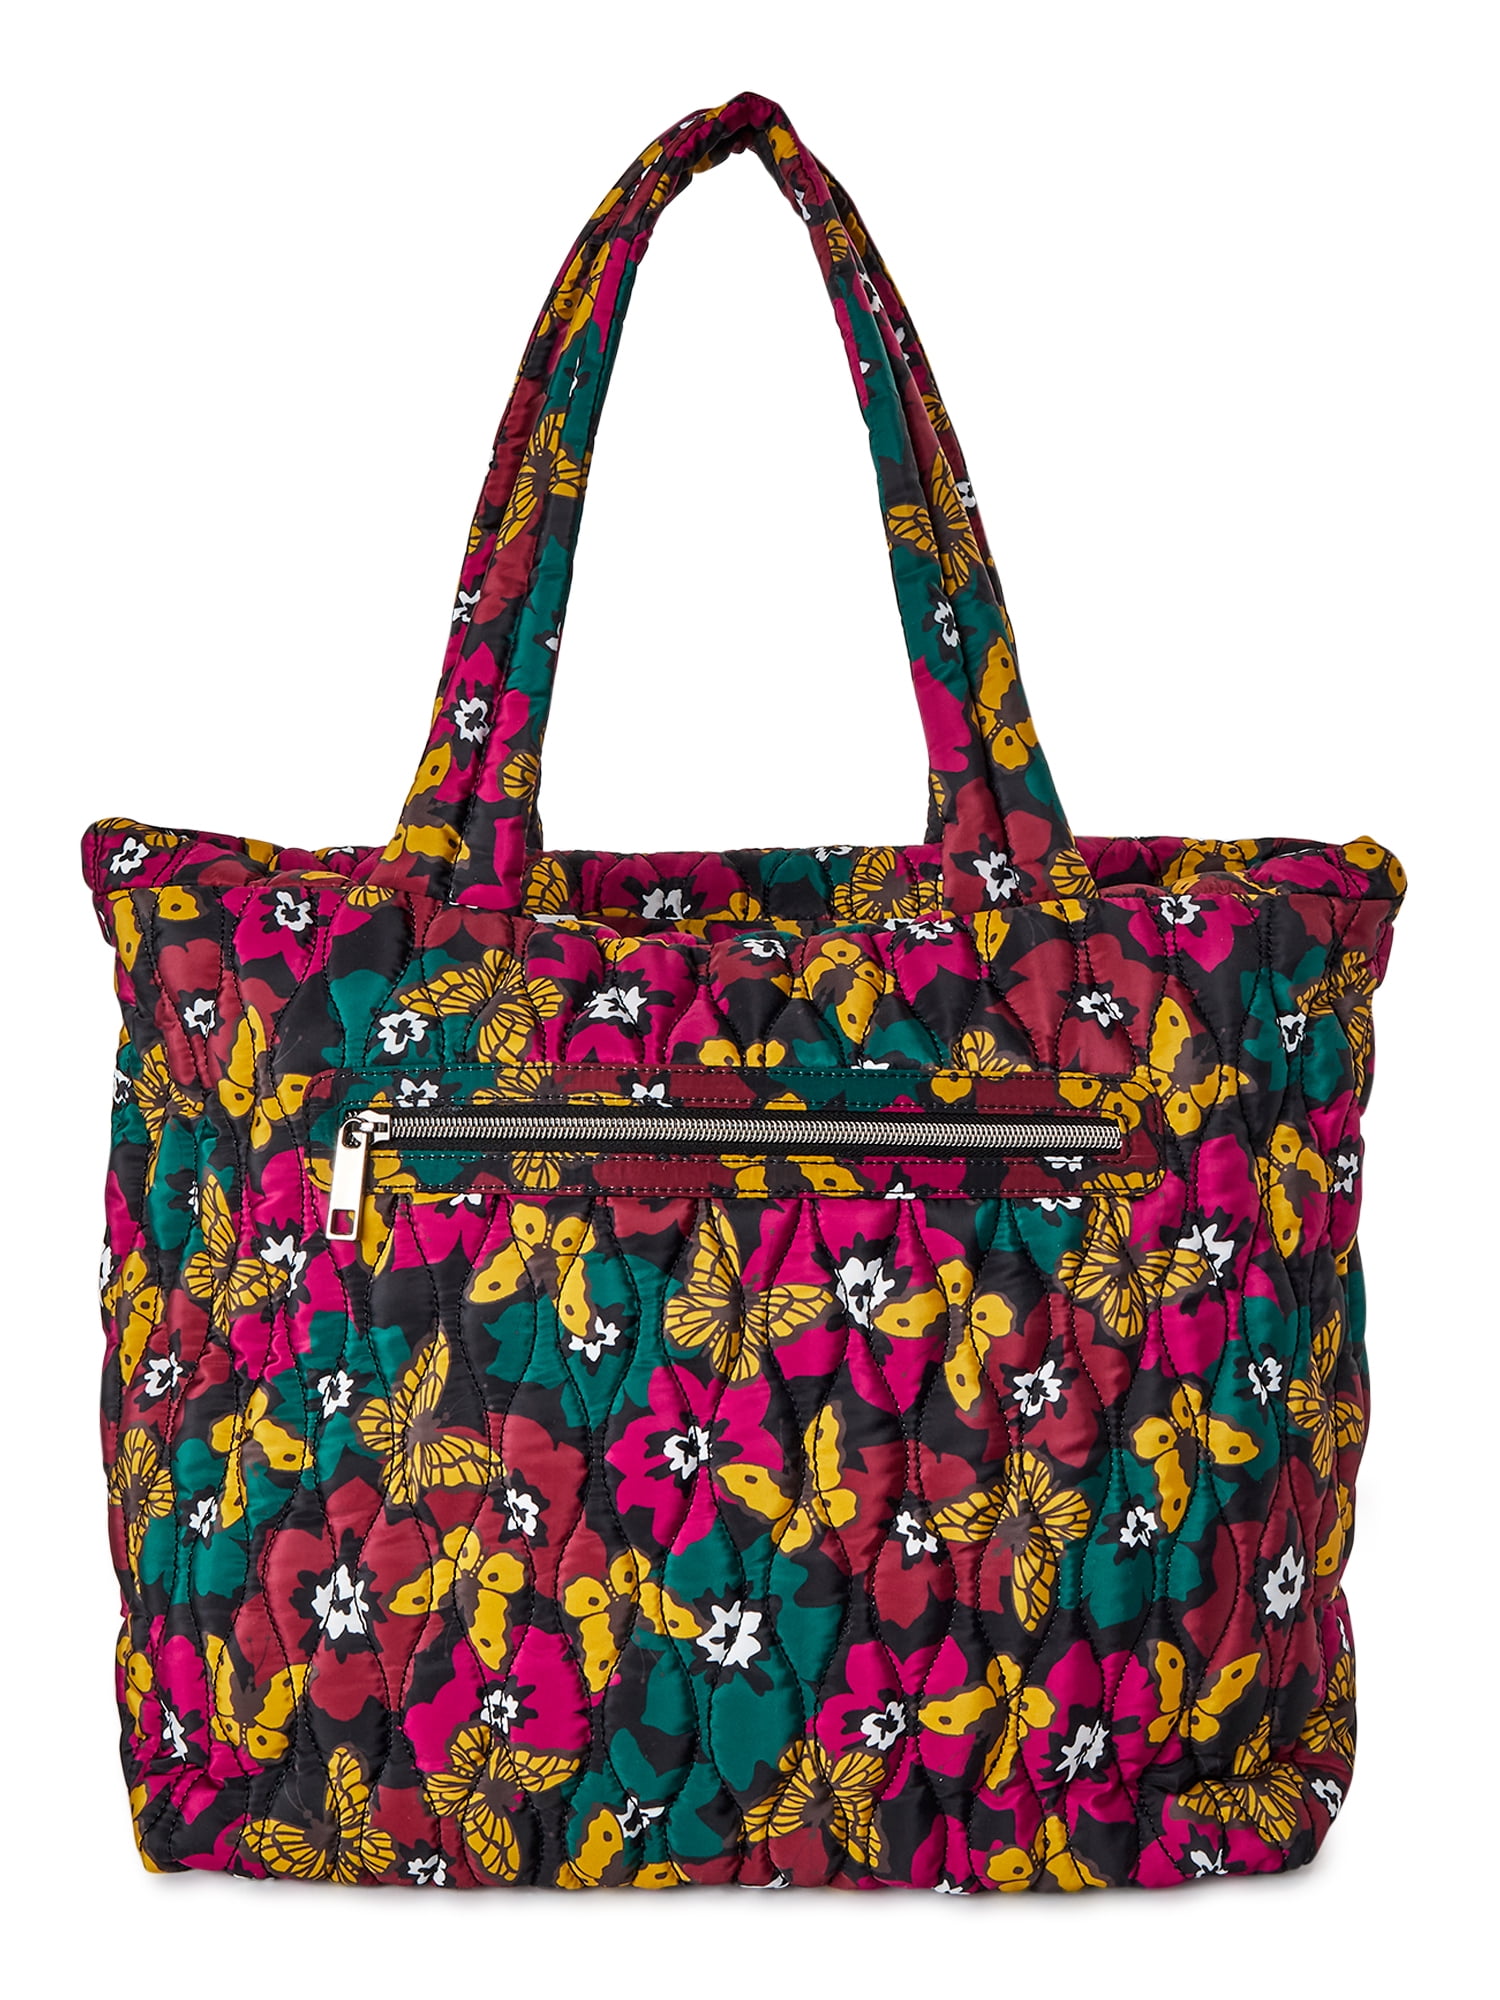 Time and Tru Women's Tara Tote Bag, Butterfly Floral